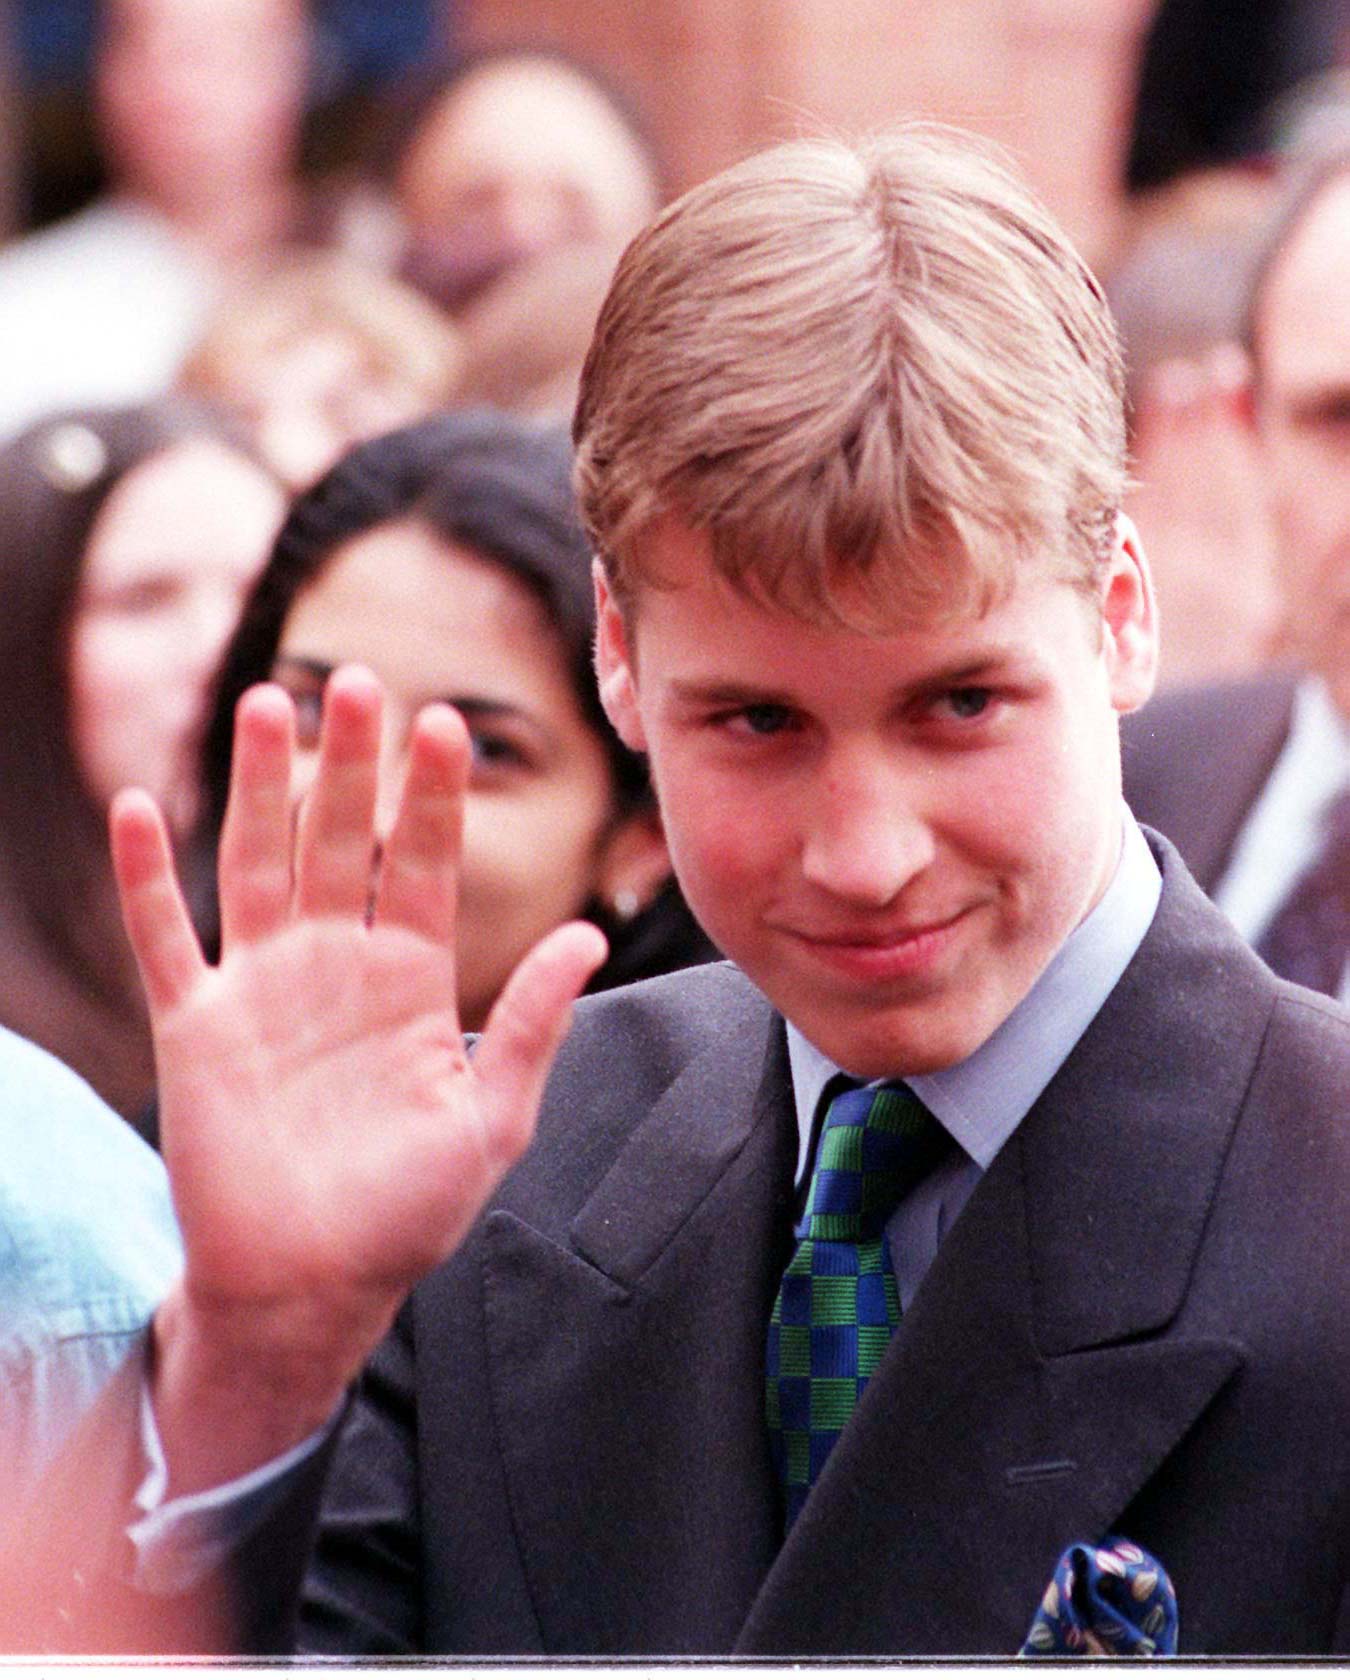 Prince William during a recent visit to the Burnaby South Secondary School in Canada on March 24, 1998 | Source: Getty Images